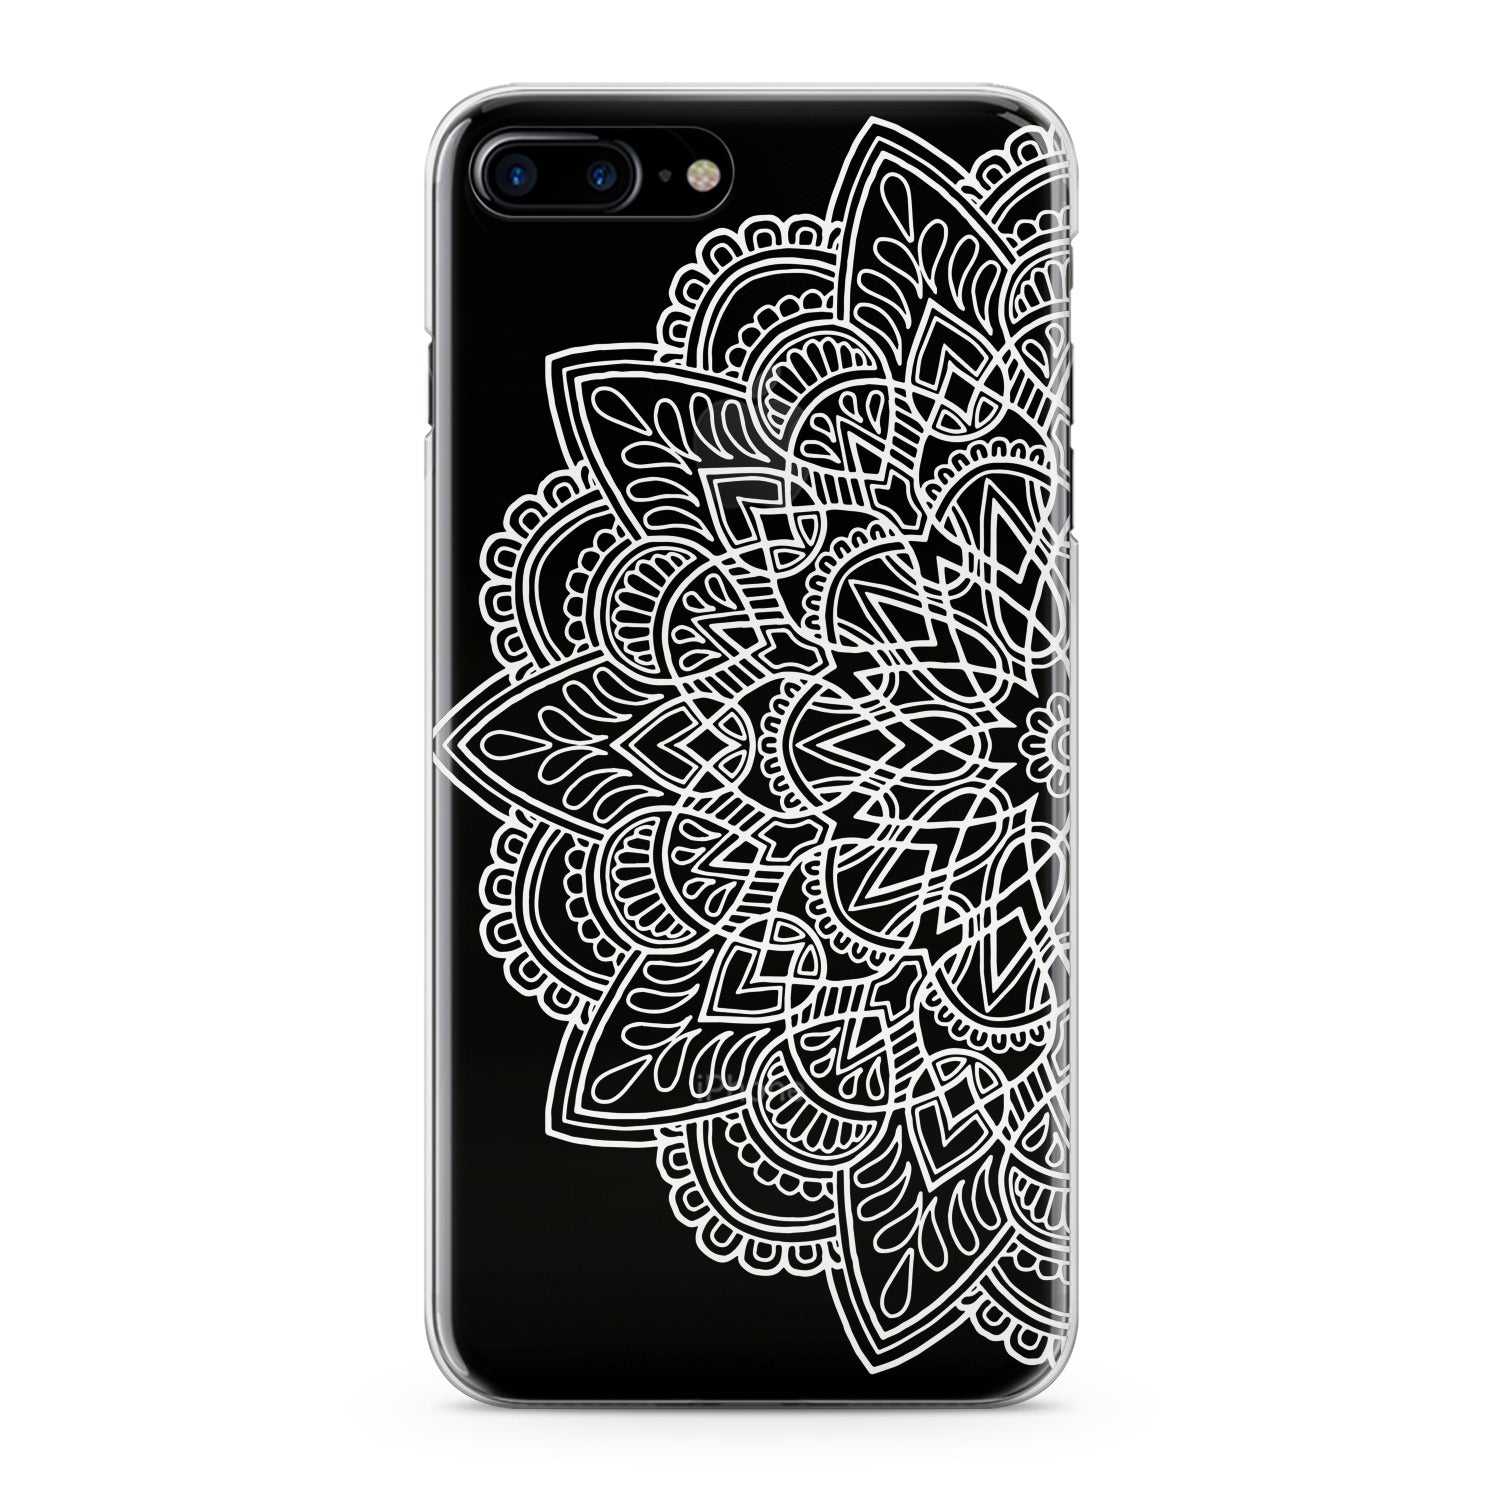 Lex Altern Mandala Max Xs Phone Case for your iPhone & Android phone.